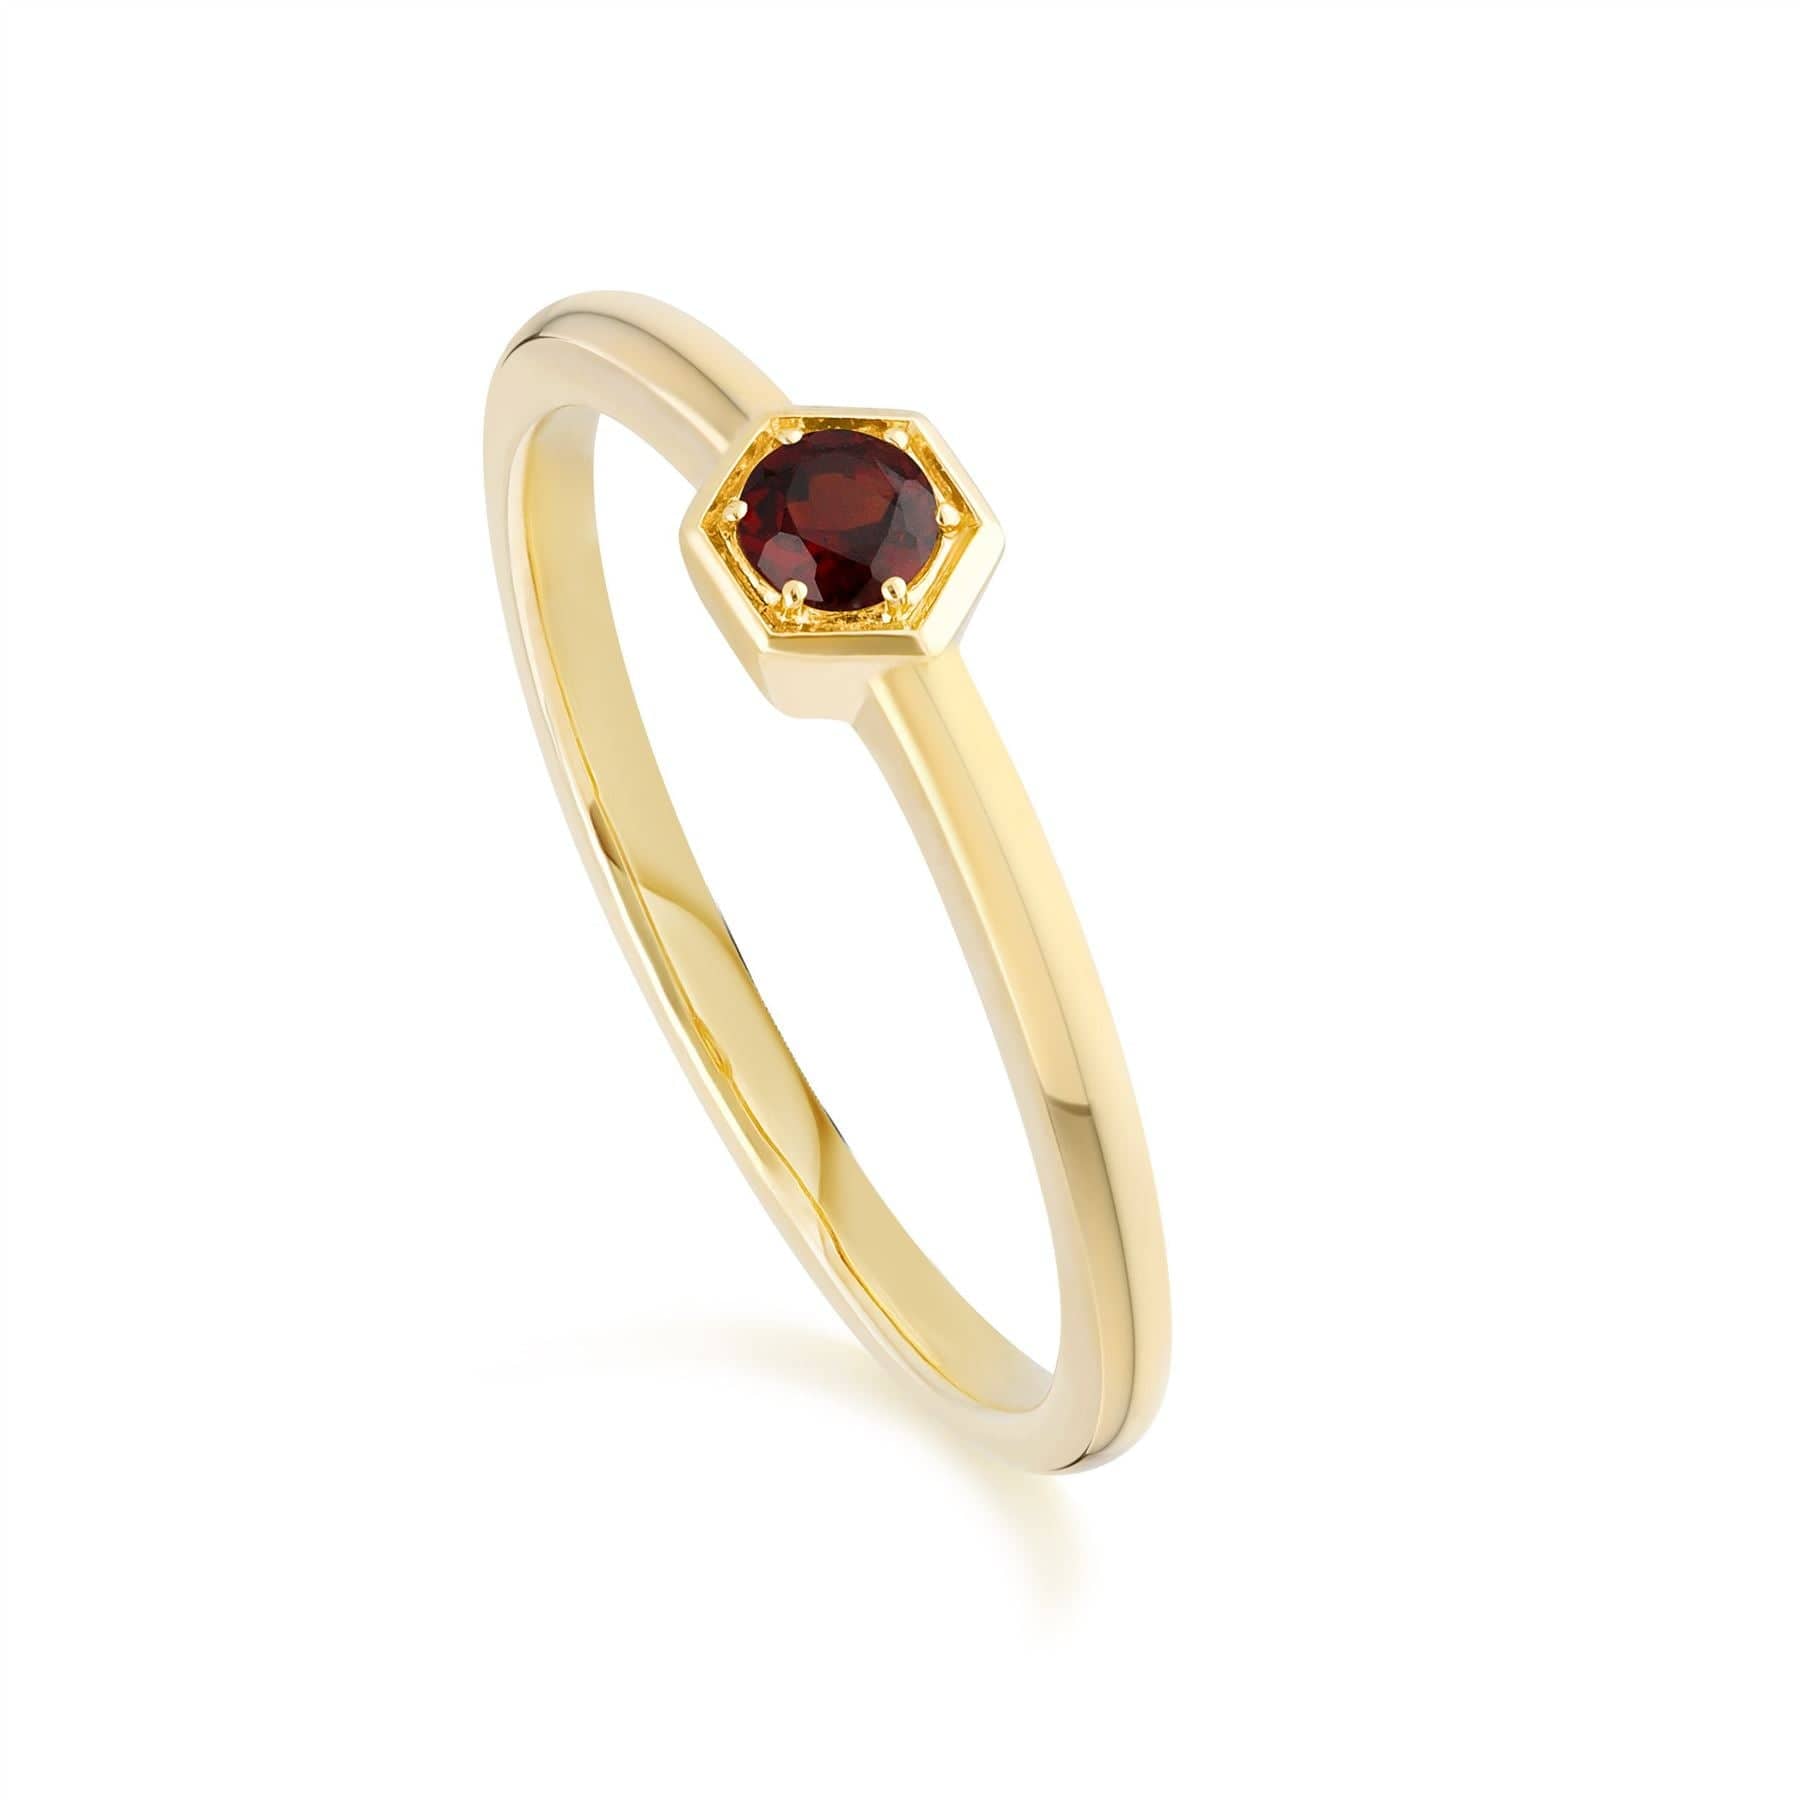 Honeycomb Inspired Garnet Ring in 9ct Yellow Gold